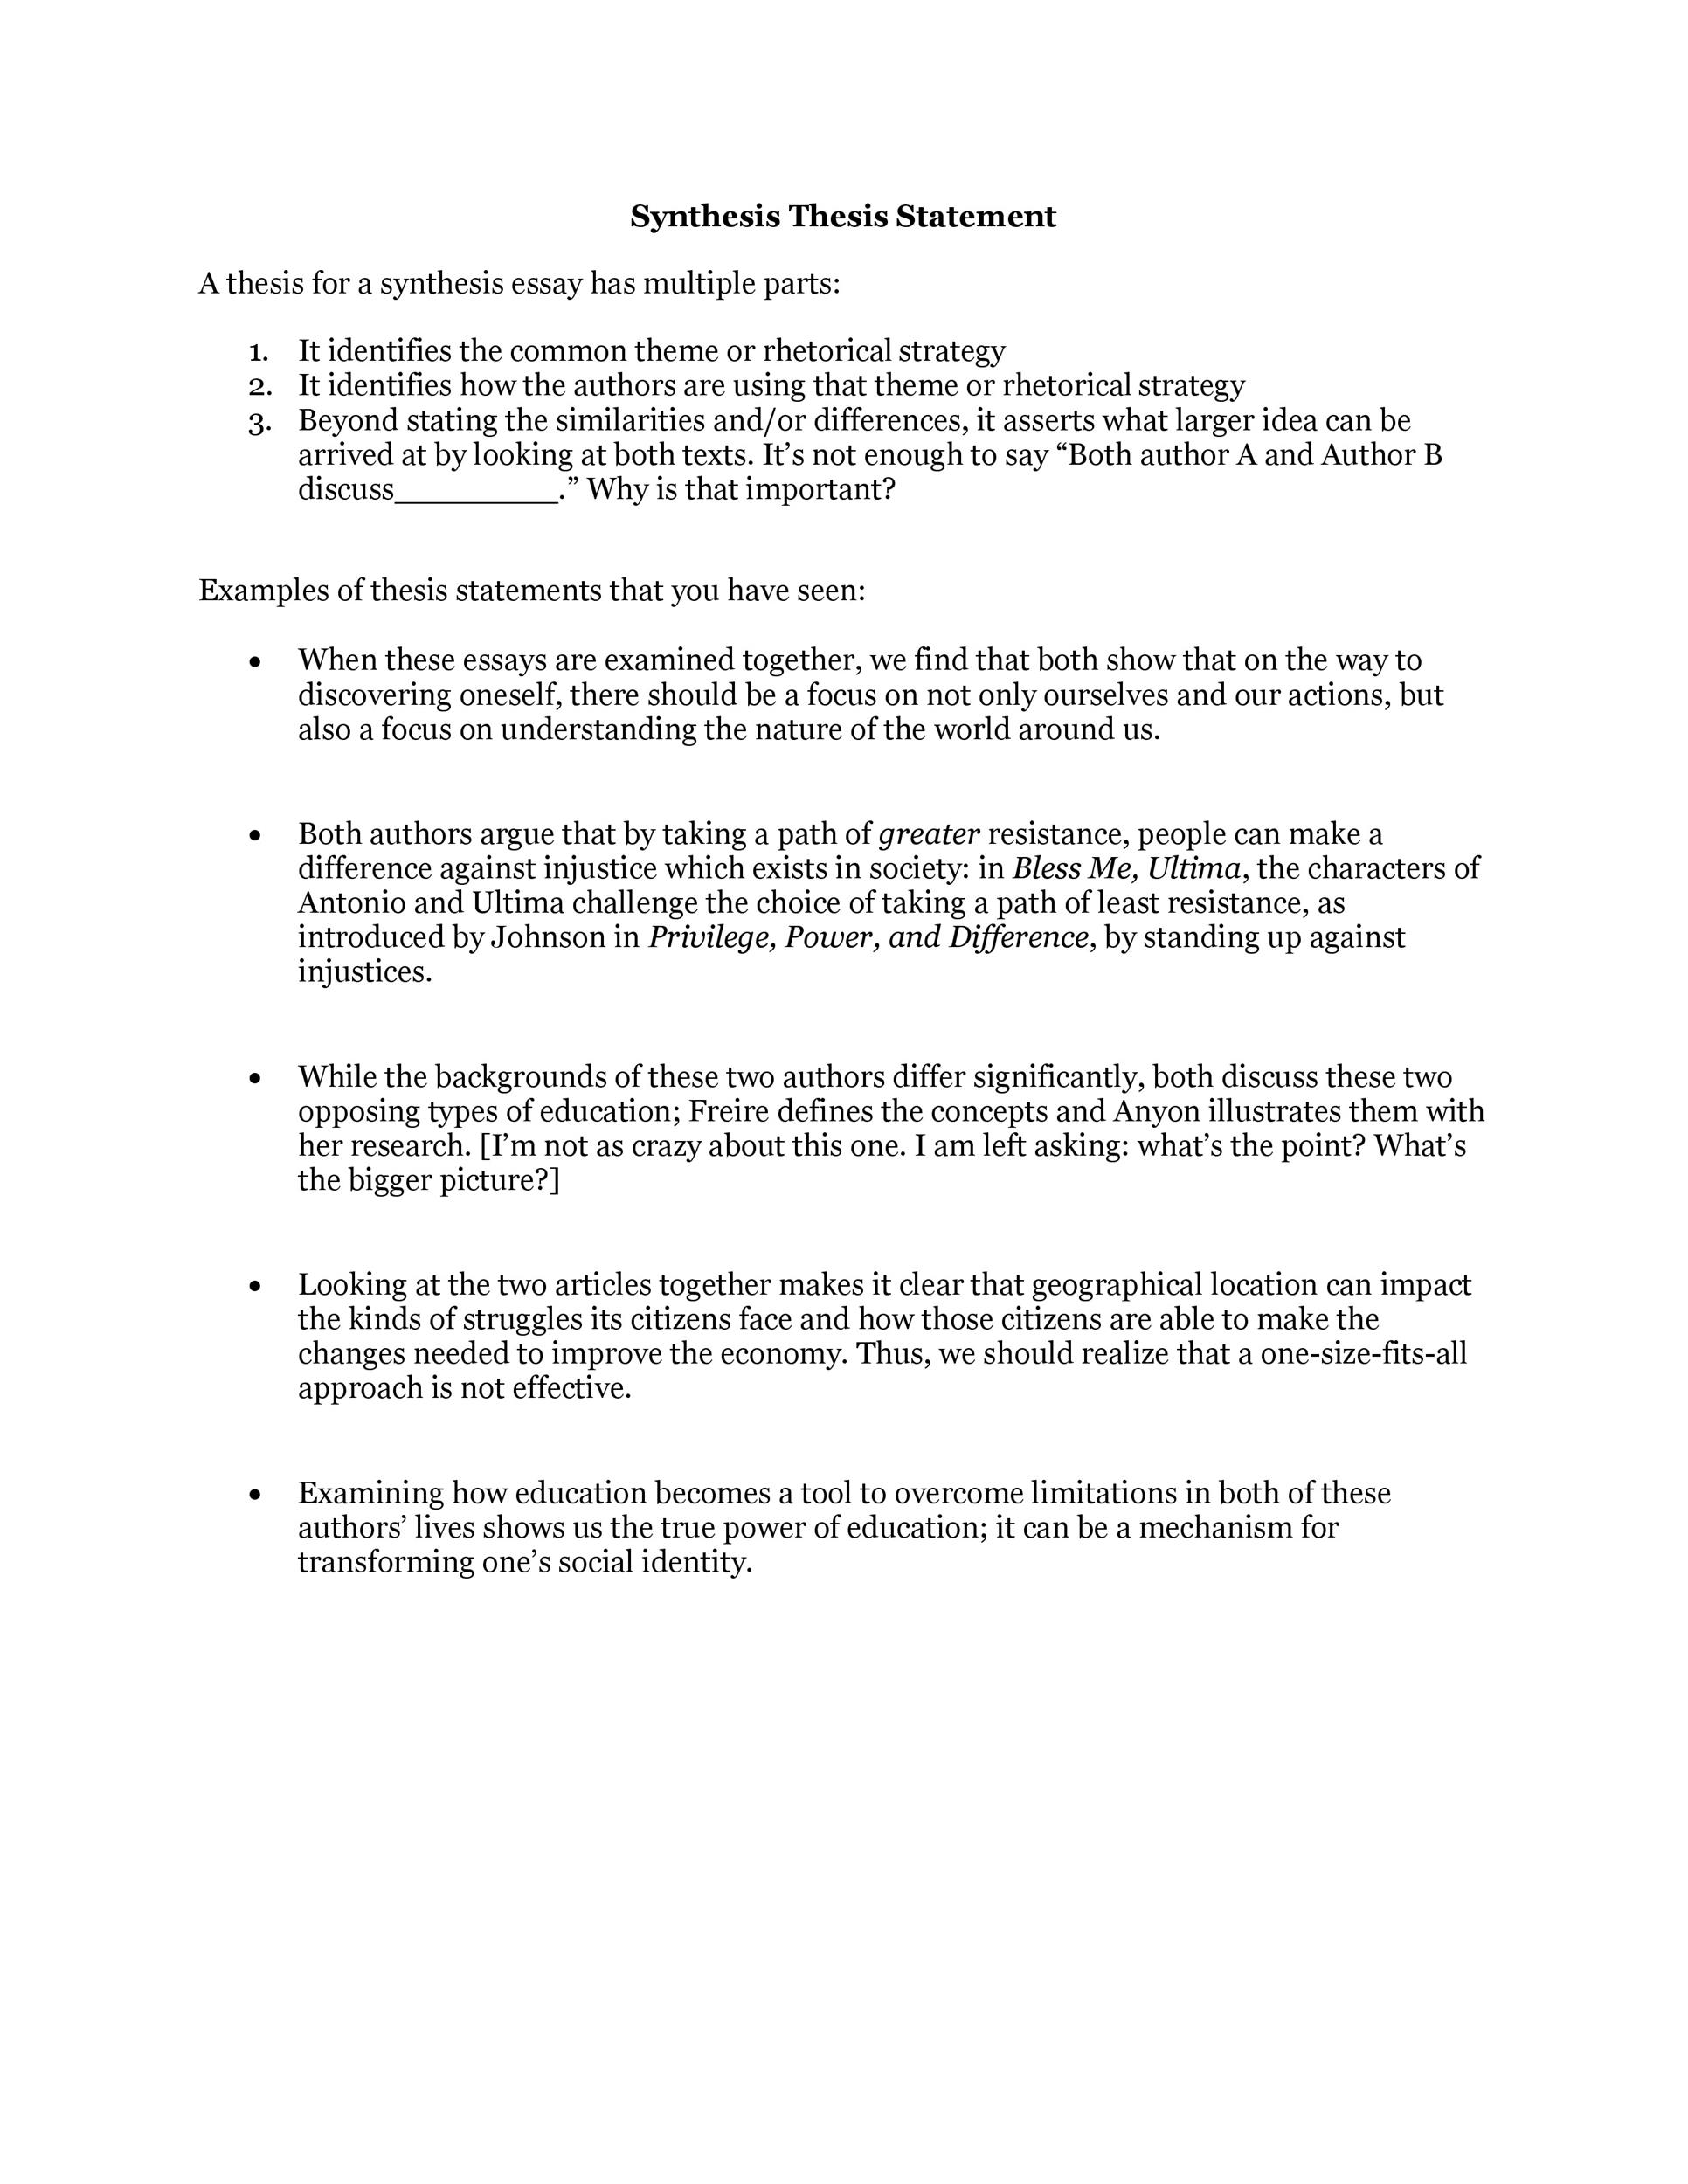 Examples of argumentative thesis statements for essays